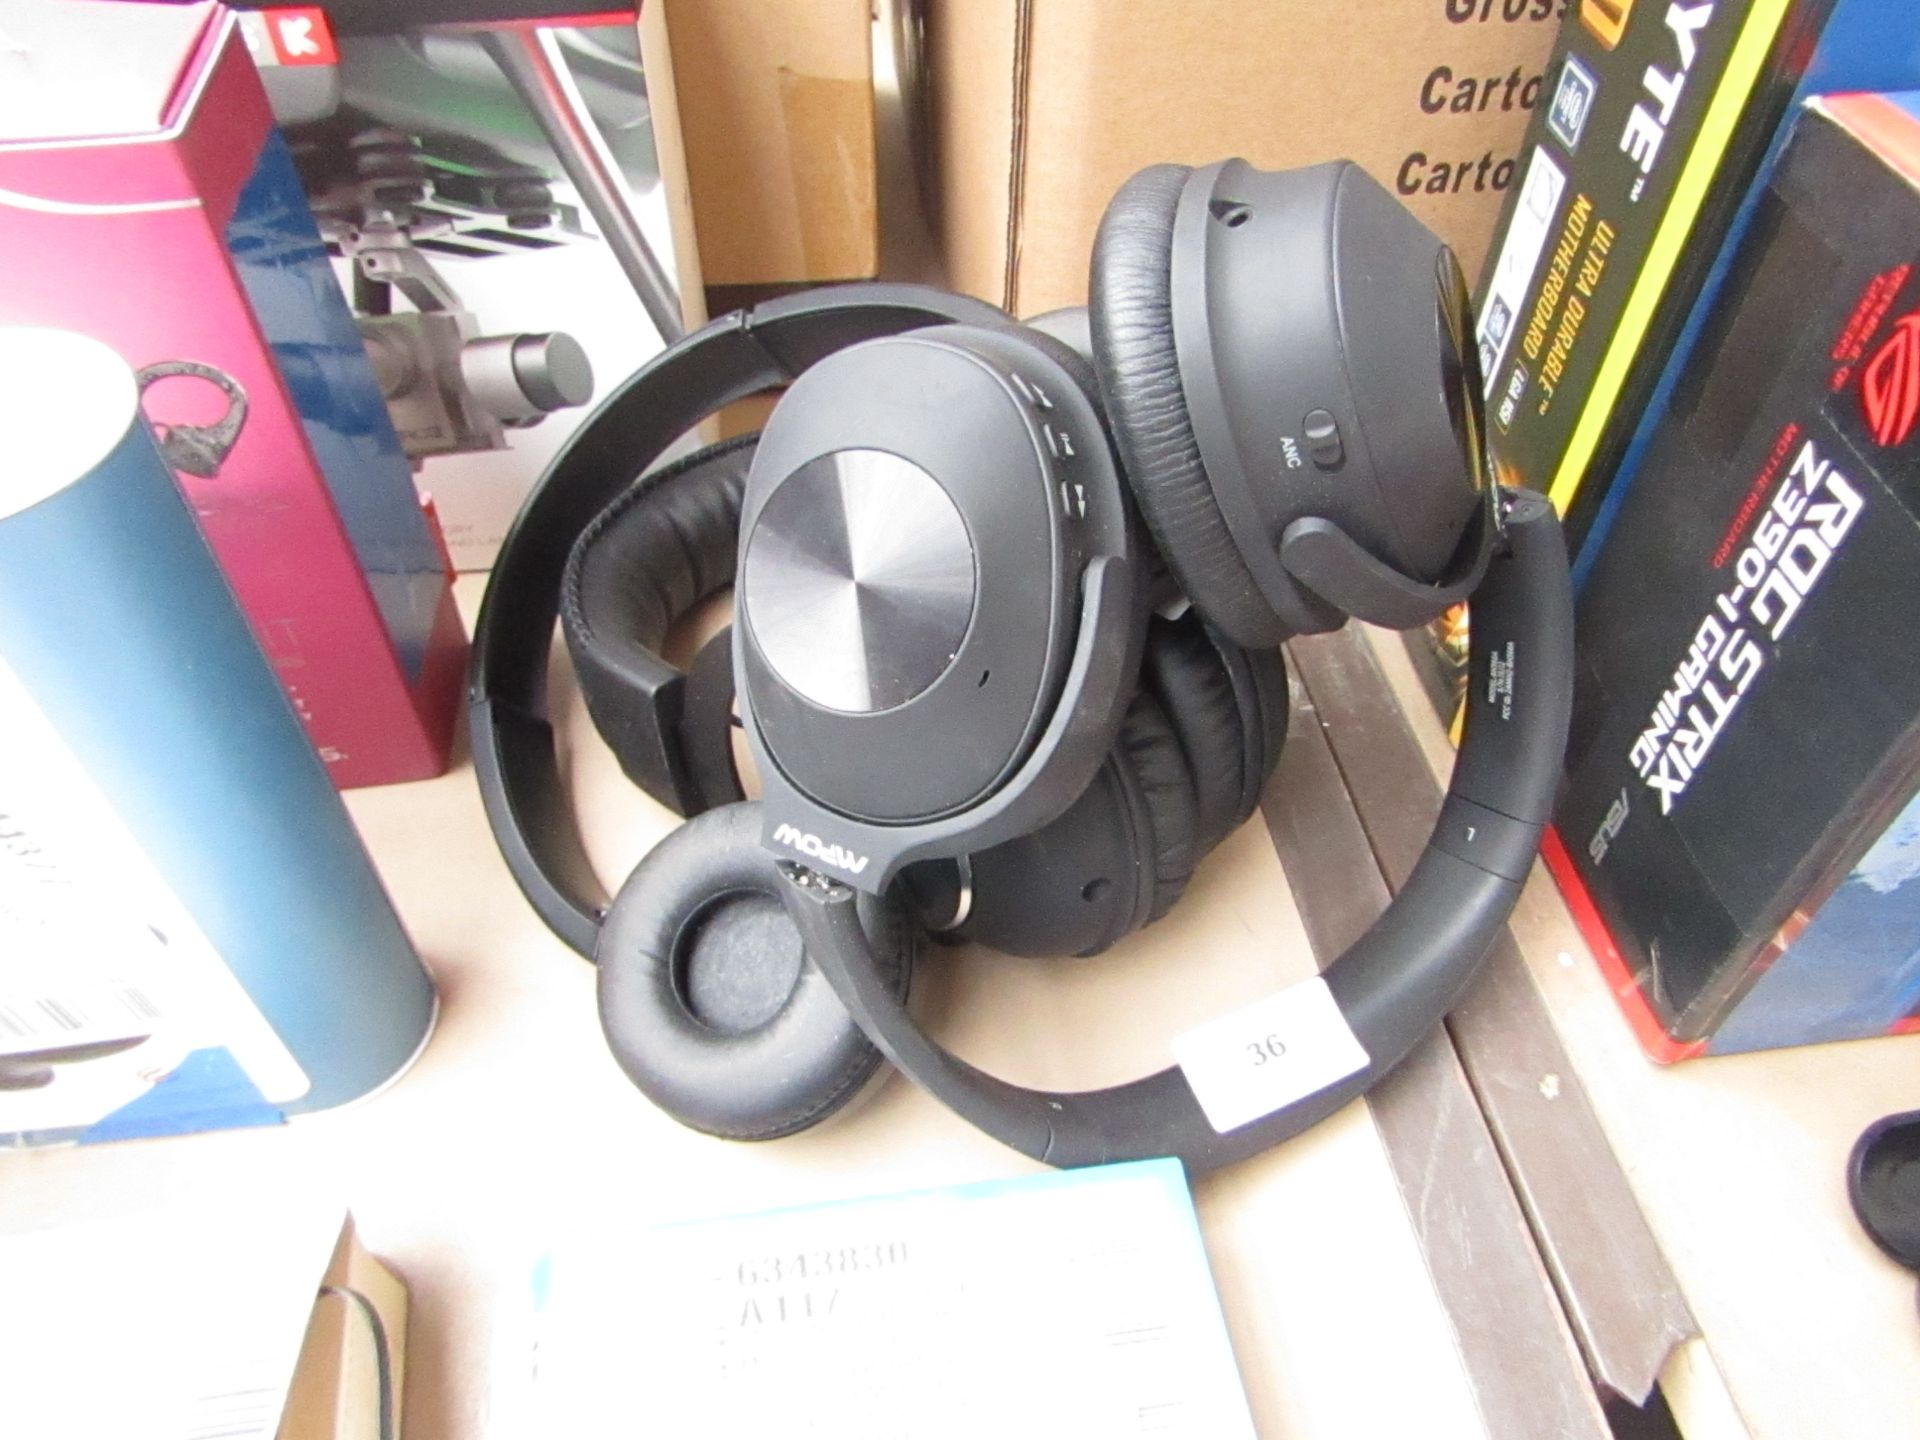 3x Various headphones, all untested with no accessories.